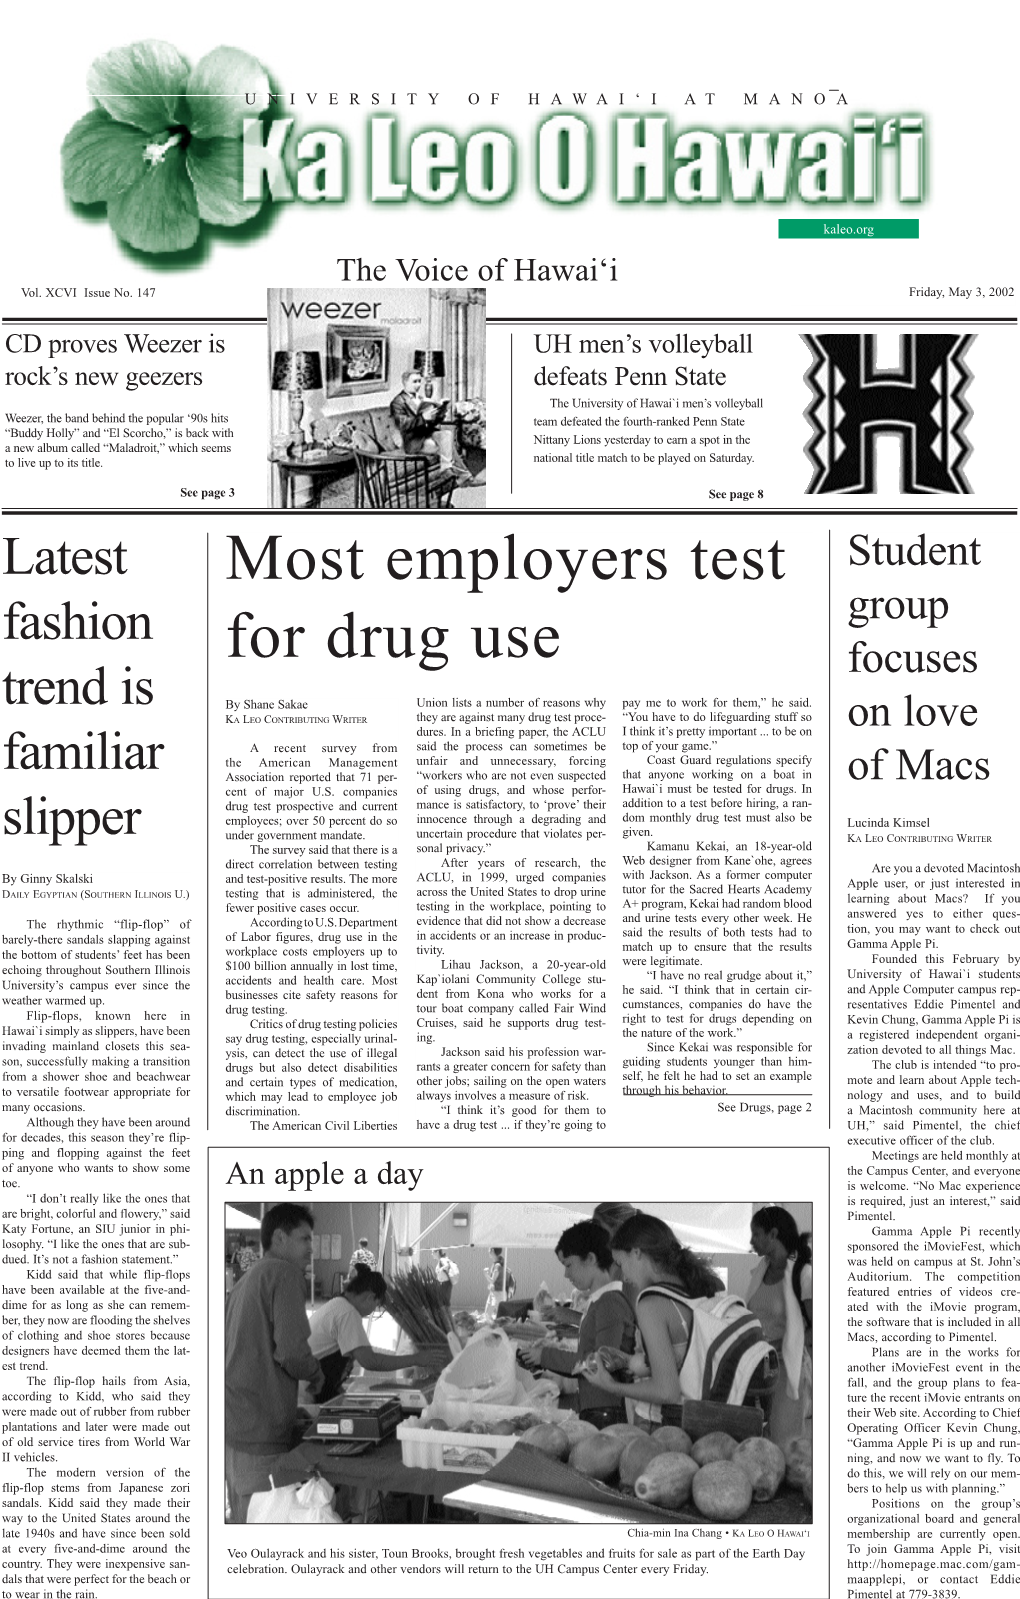 Most Employers Test for Drug